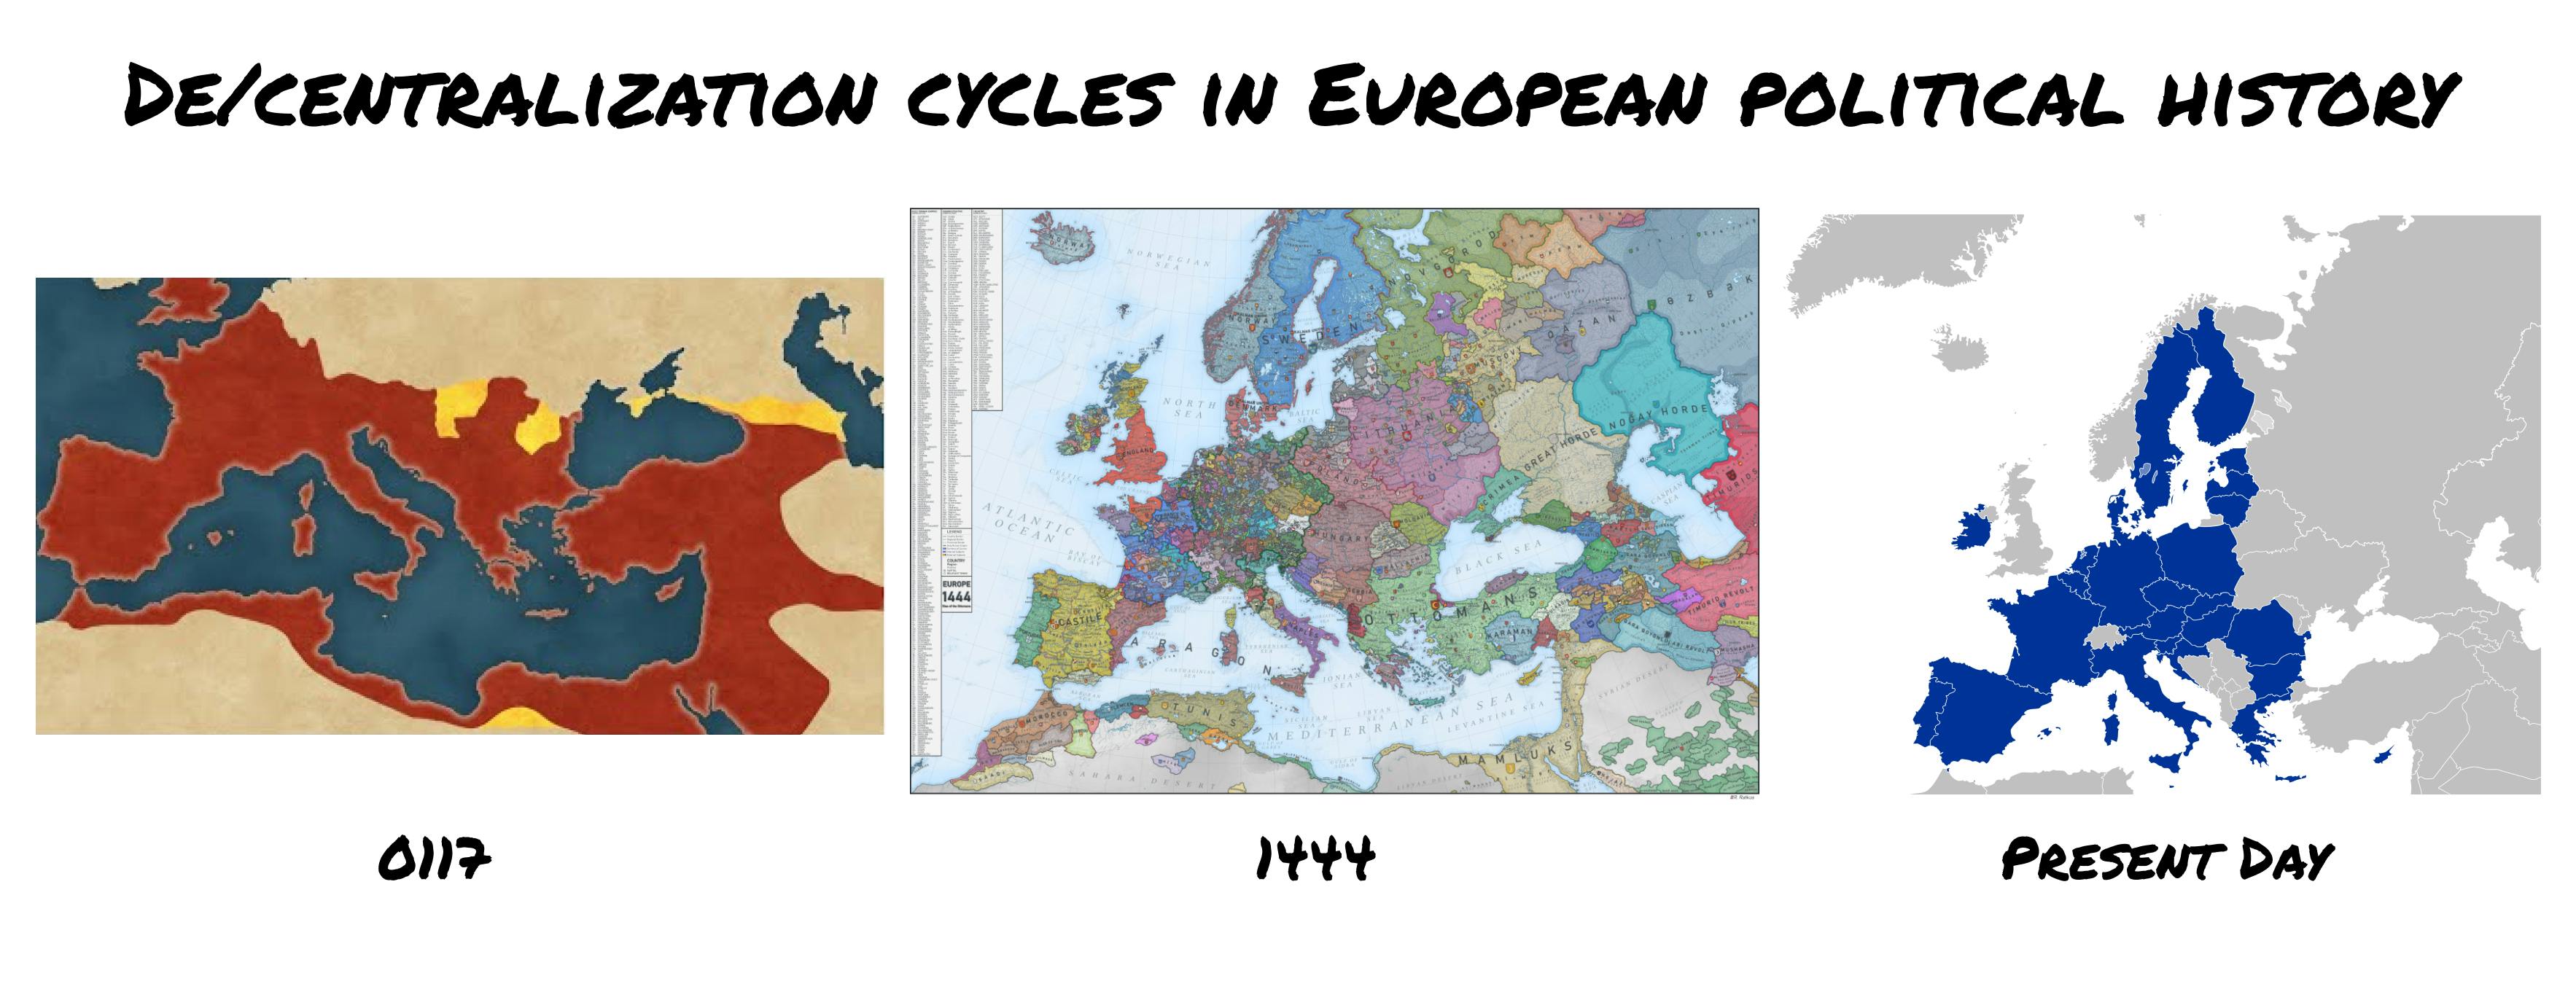 Decentralization cycles in European Political History